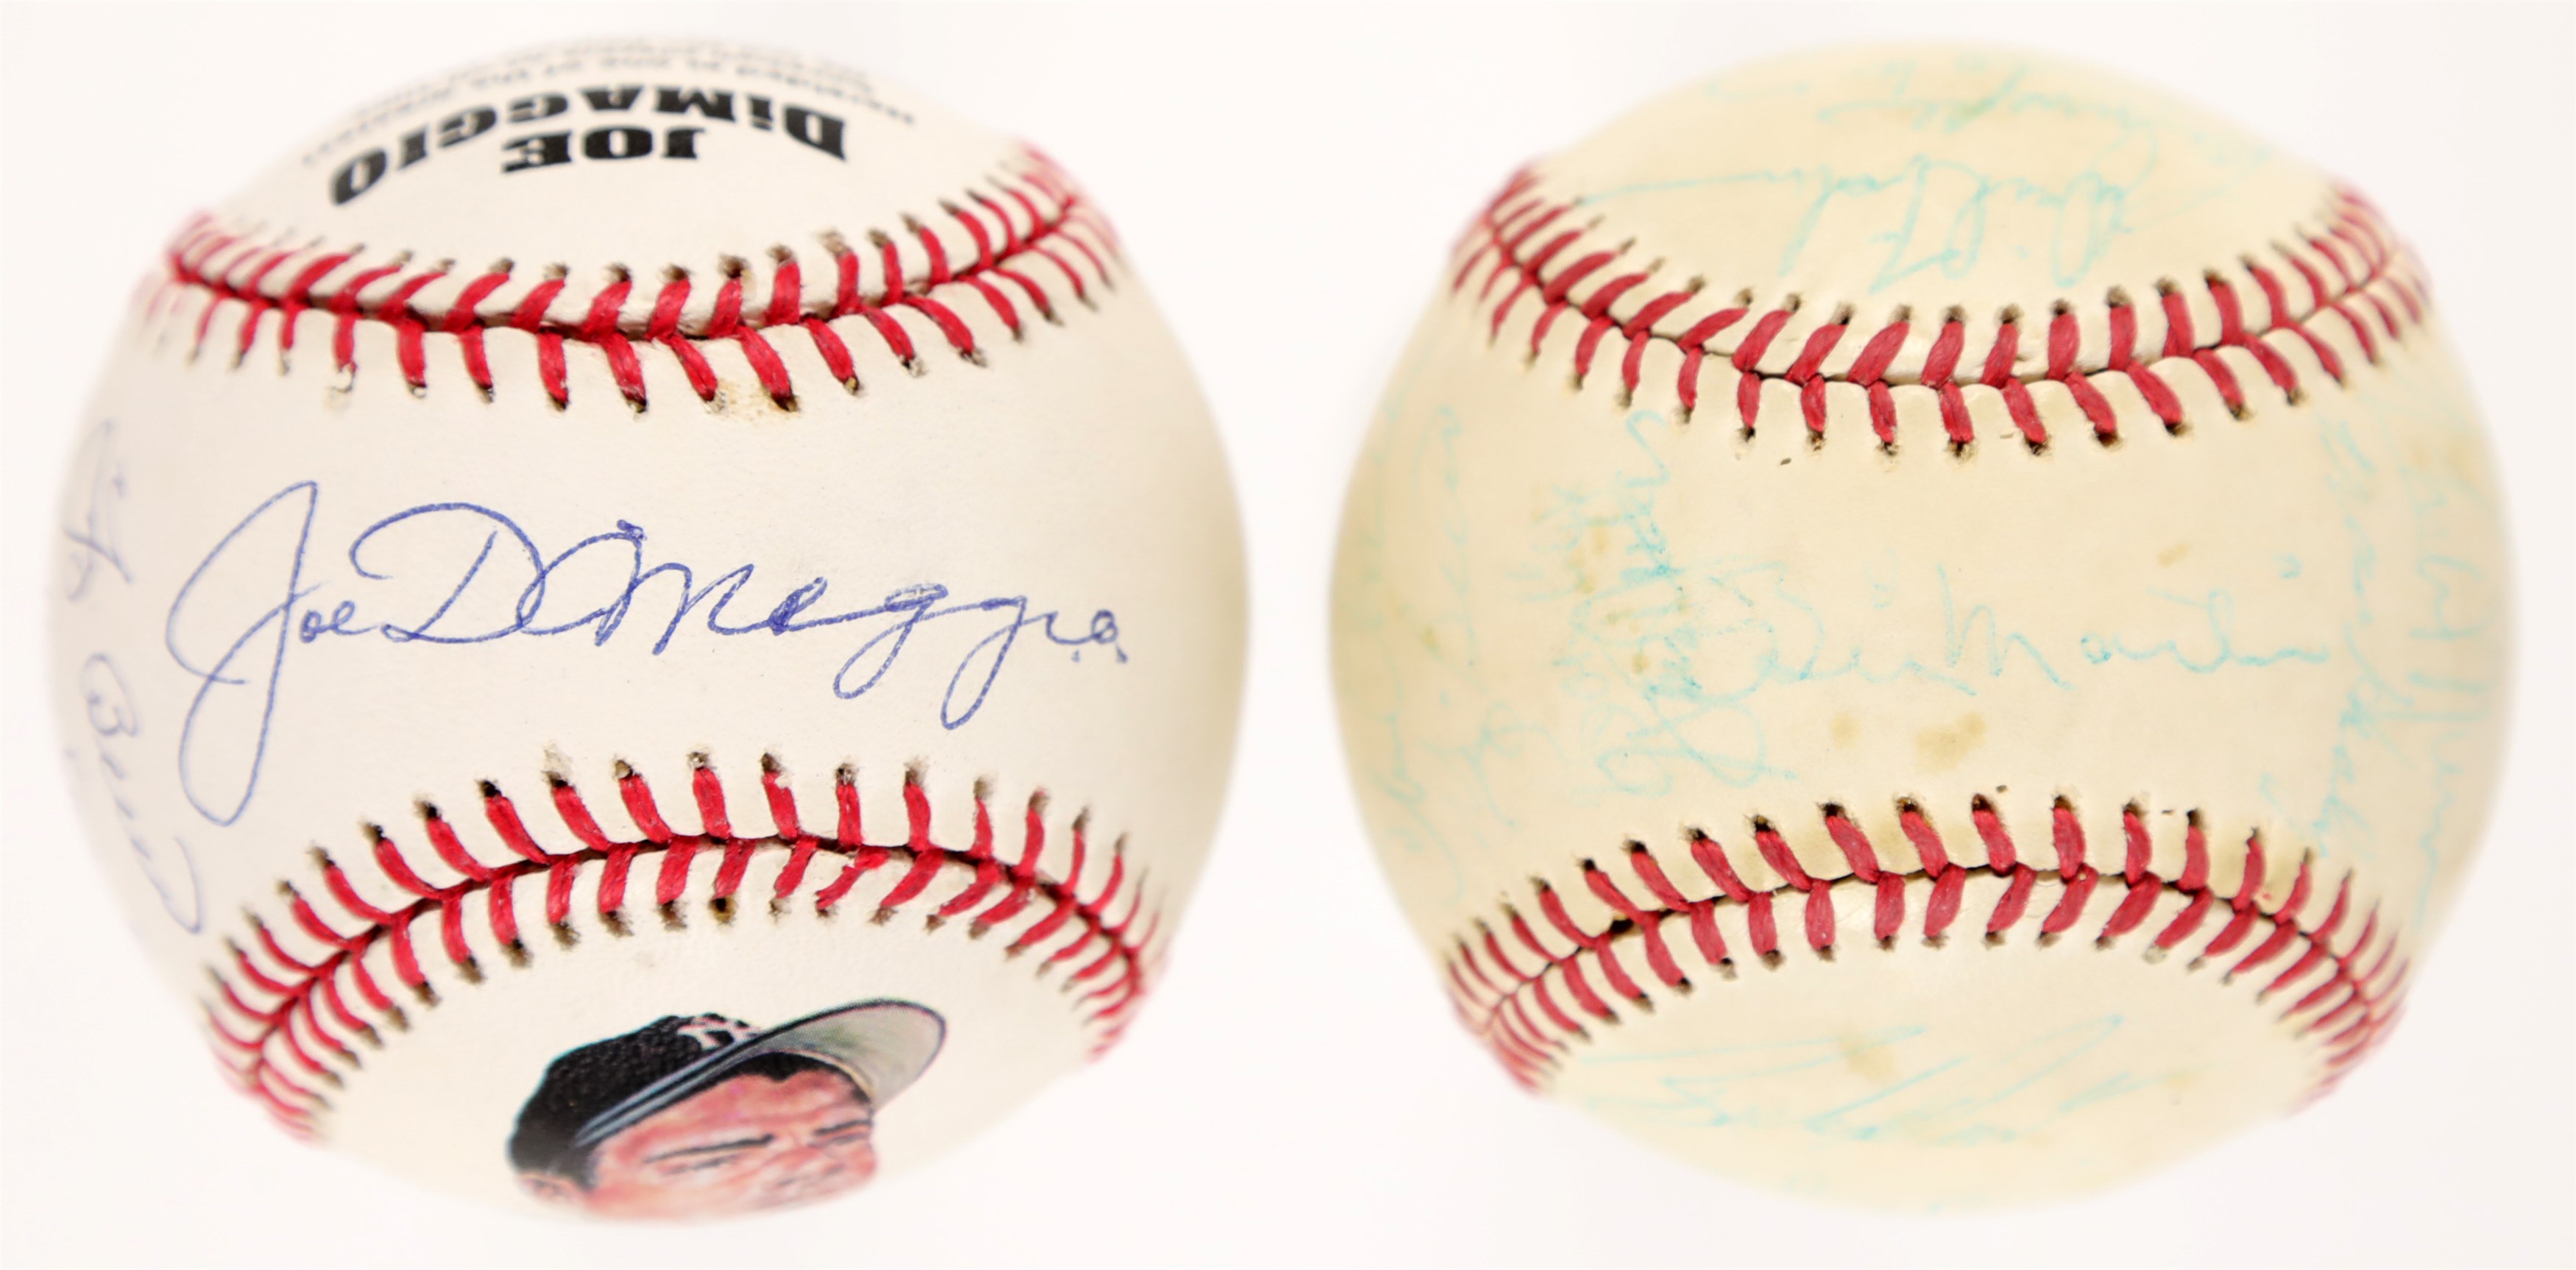 - 1977 WS Champion NY Yankees Team Signed Ball and Joe DiMaggio Signed Stat Ball